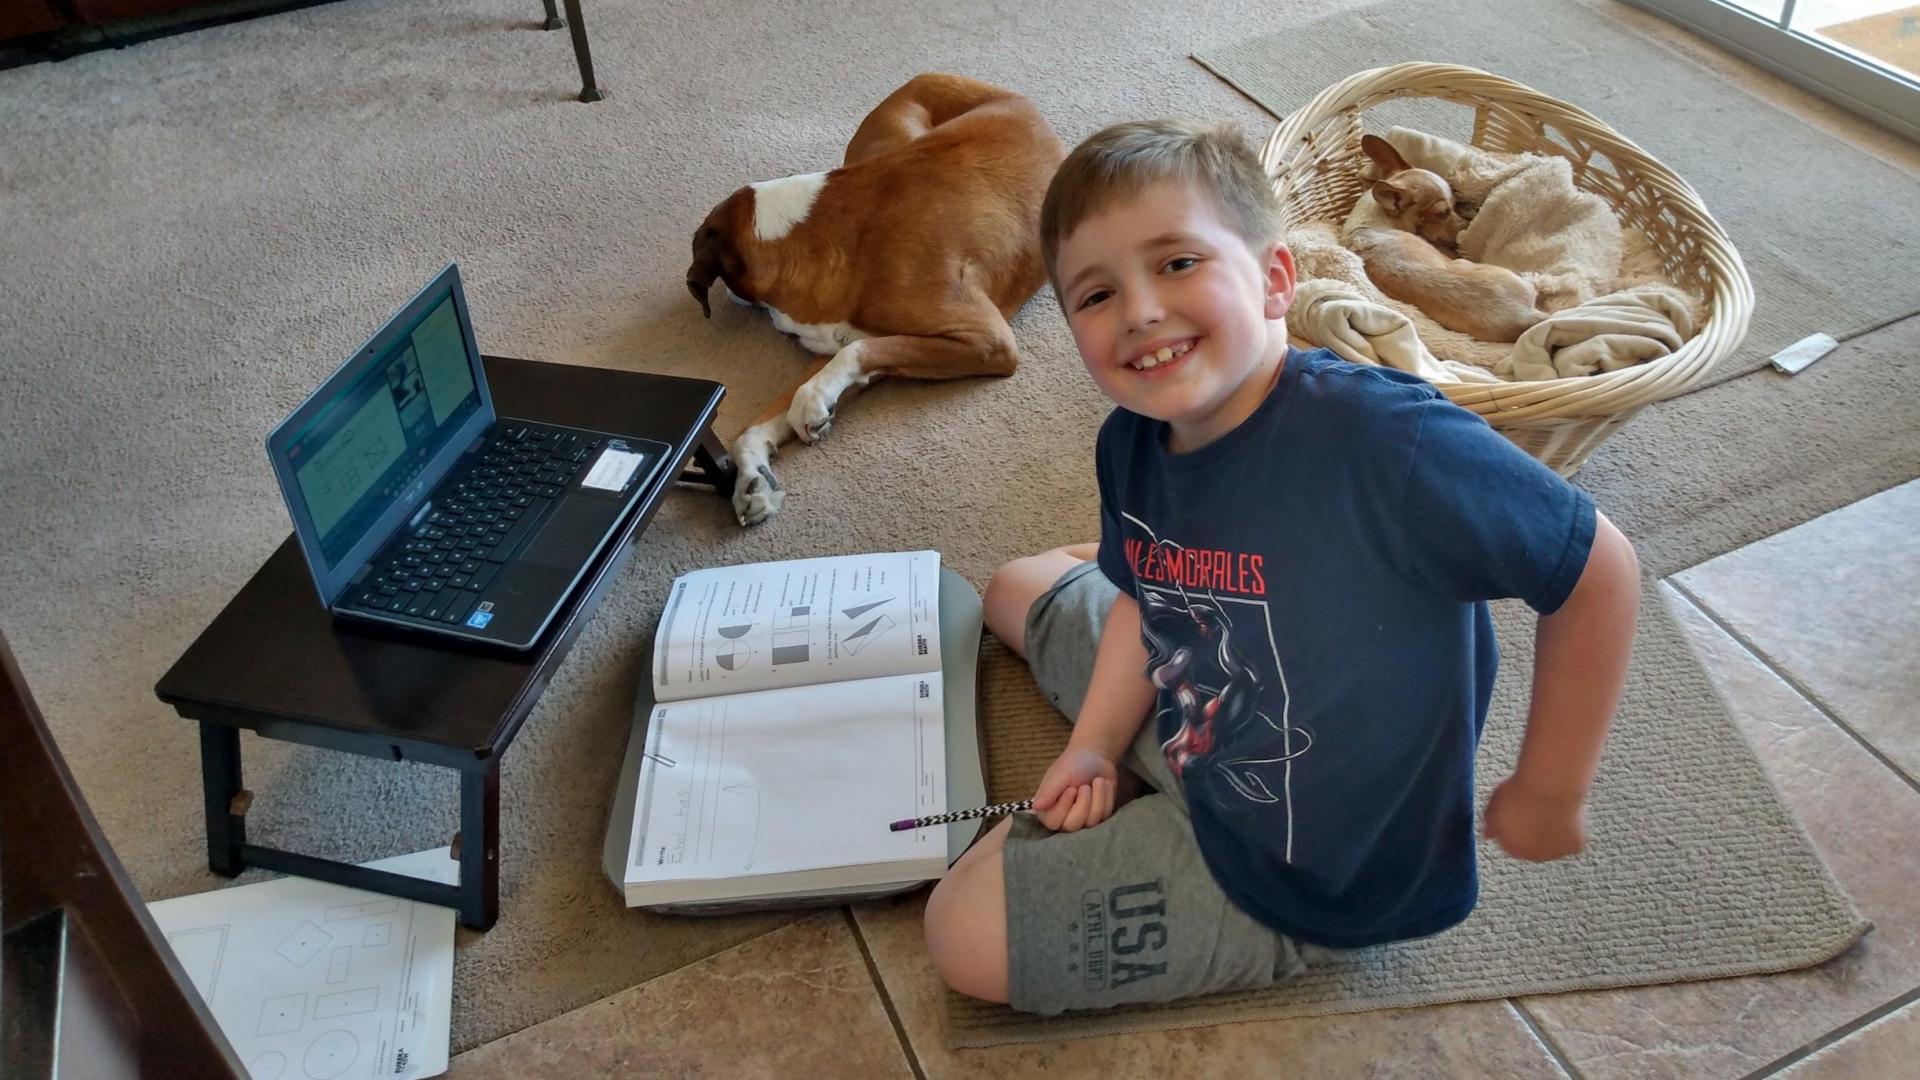 Boy with chromebook and 2 dogs